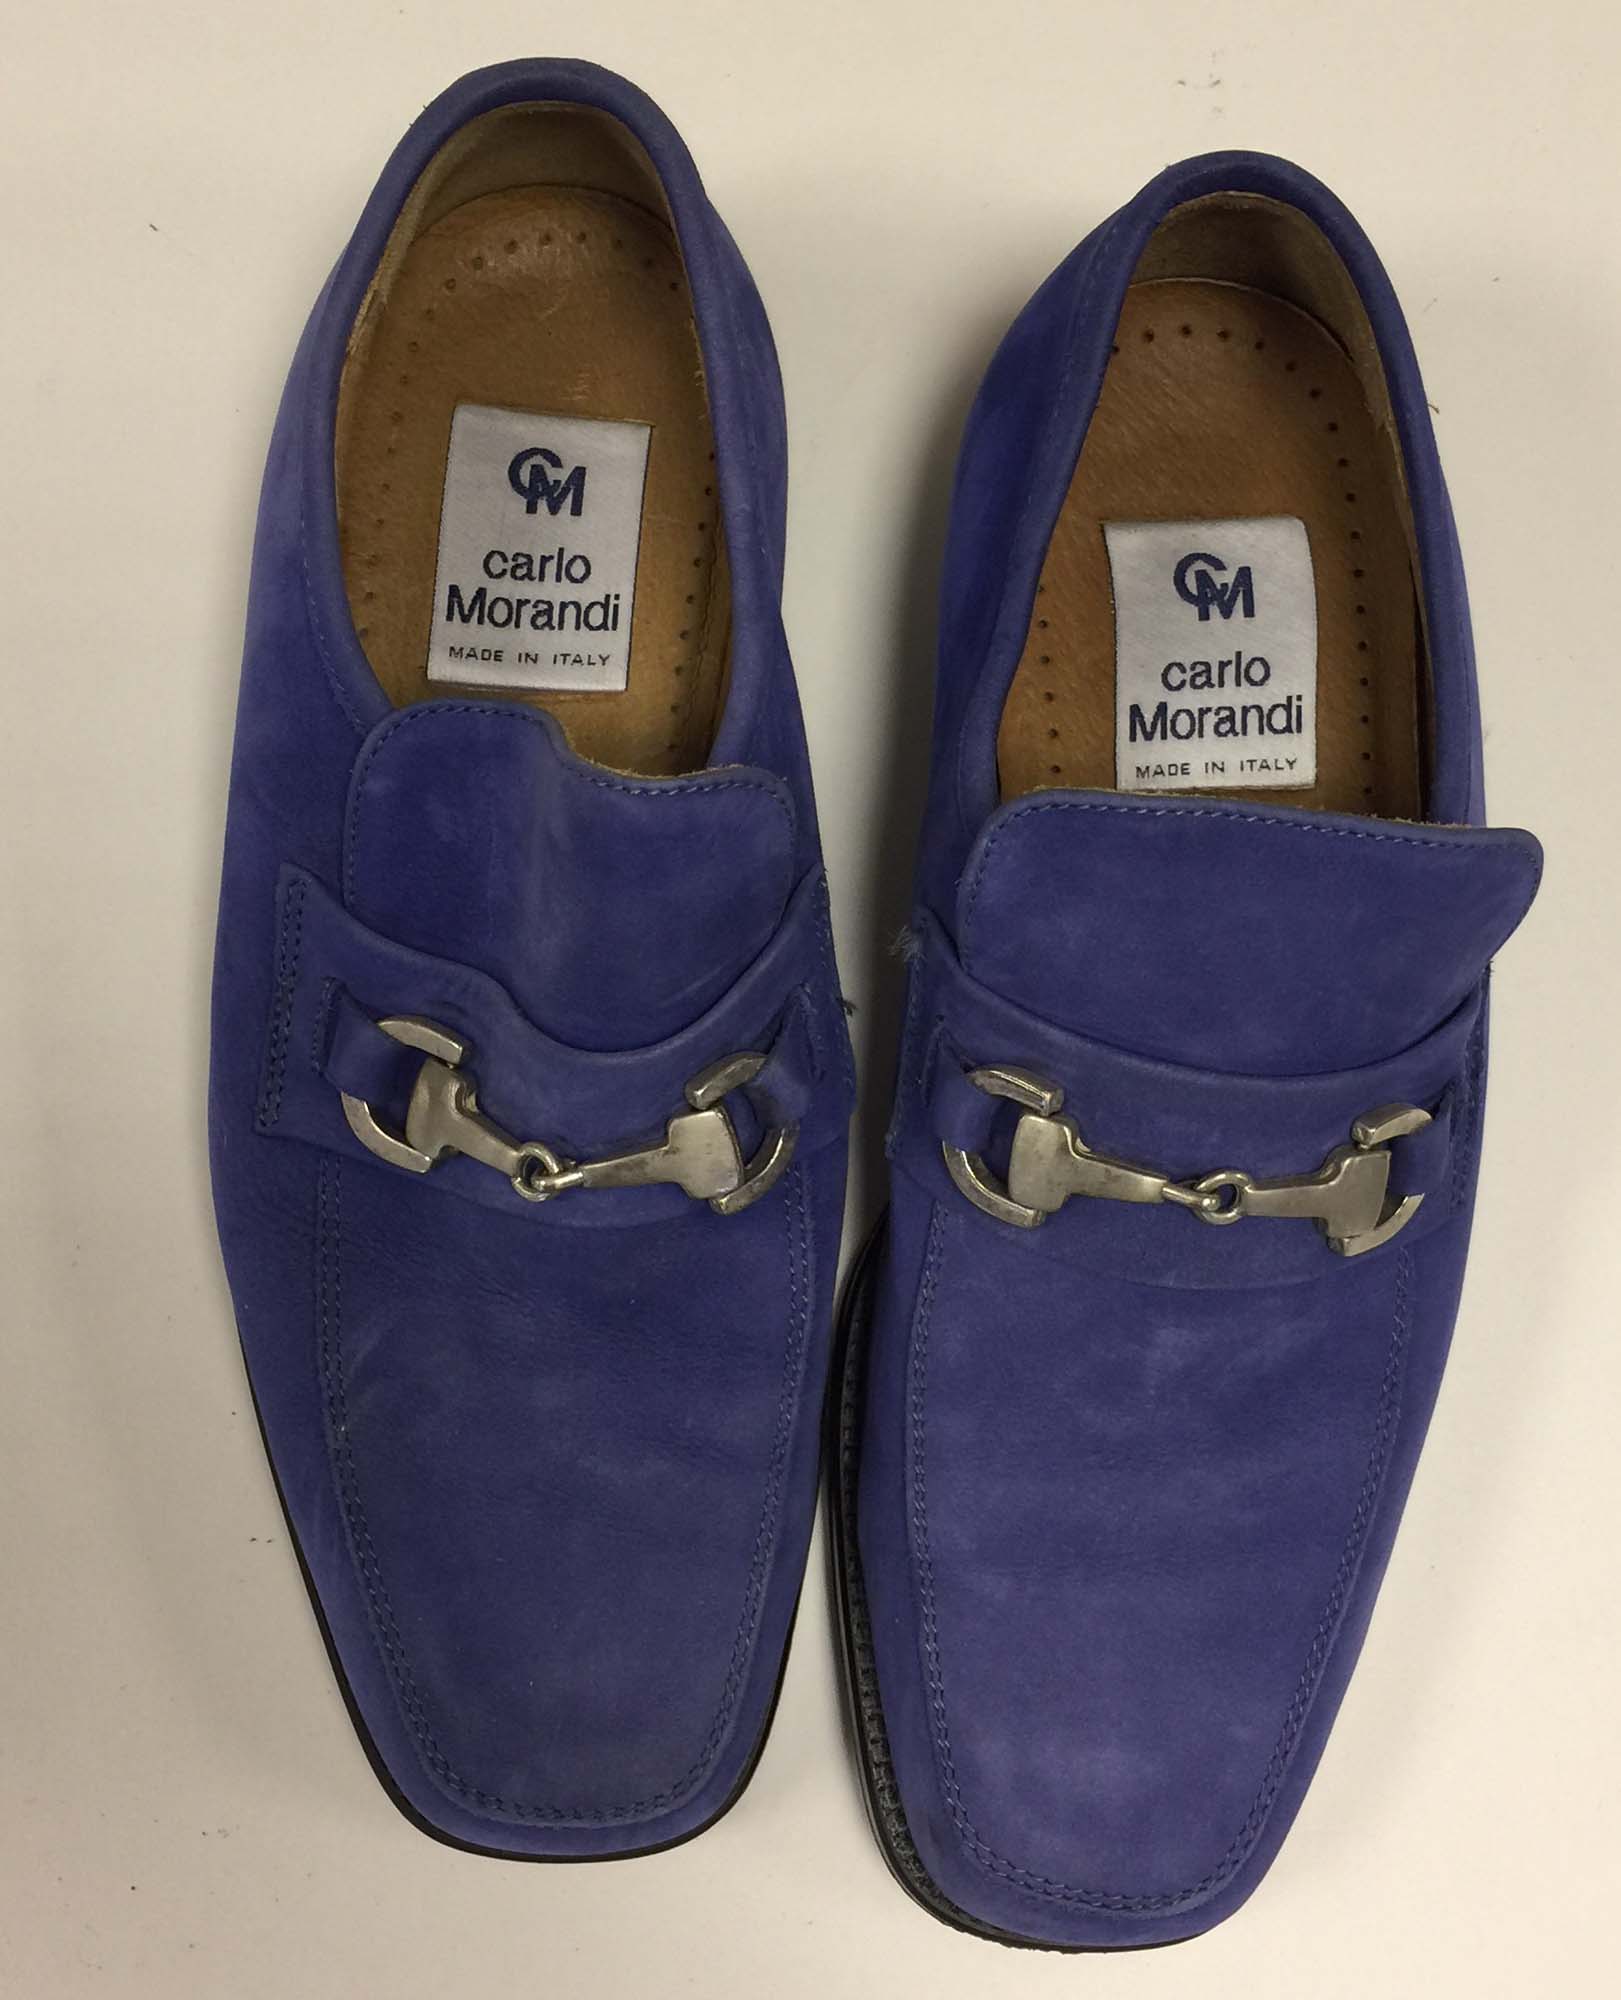 ROCK & ROLL MUSEUM DENMARK - CARL PERKINS' BLUE SUEDE SHOES. - Image 3 of 5